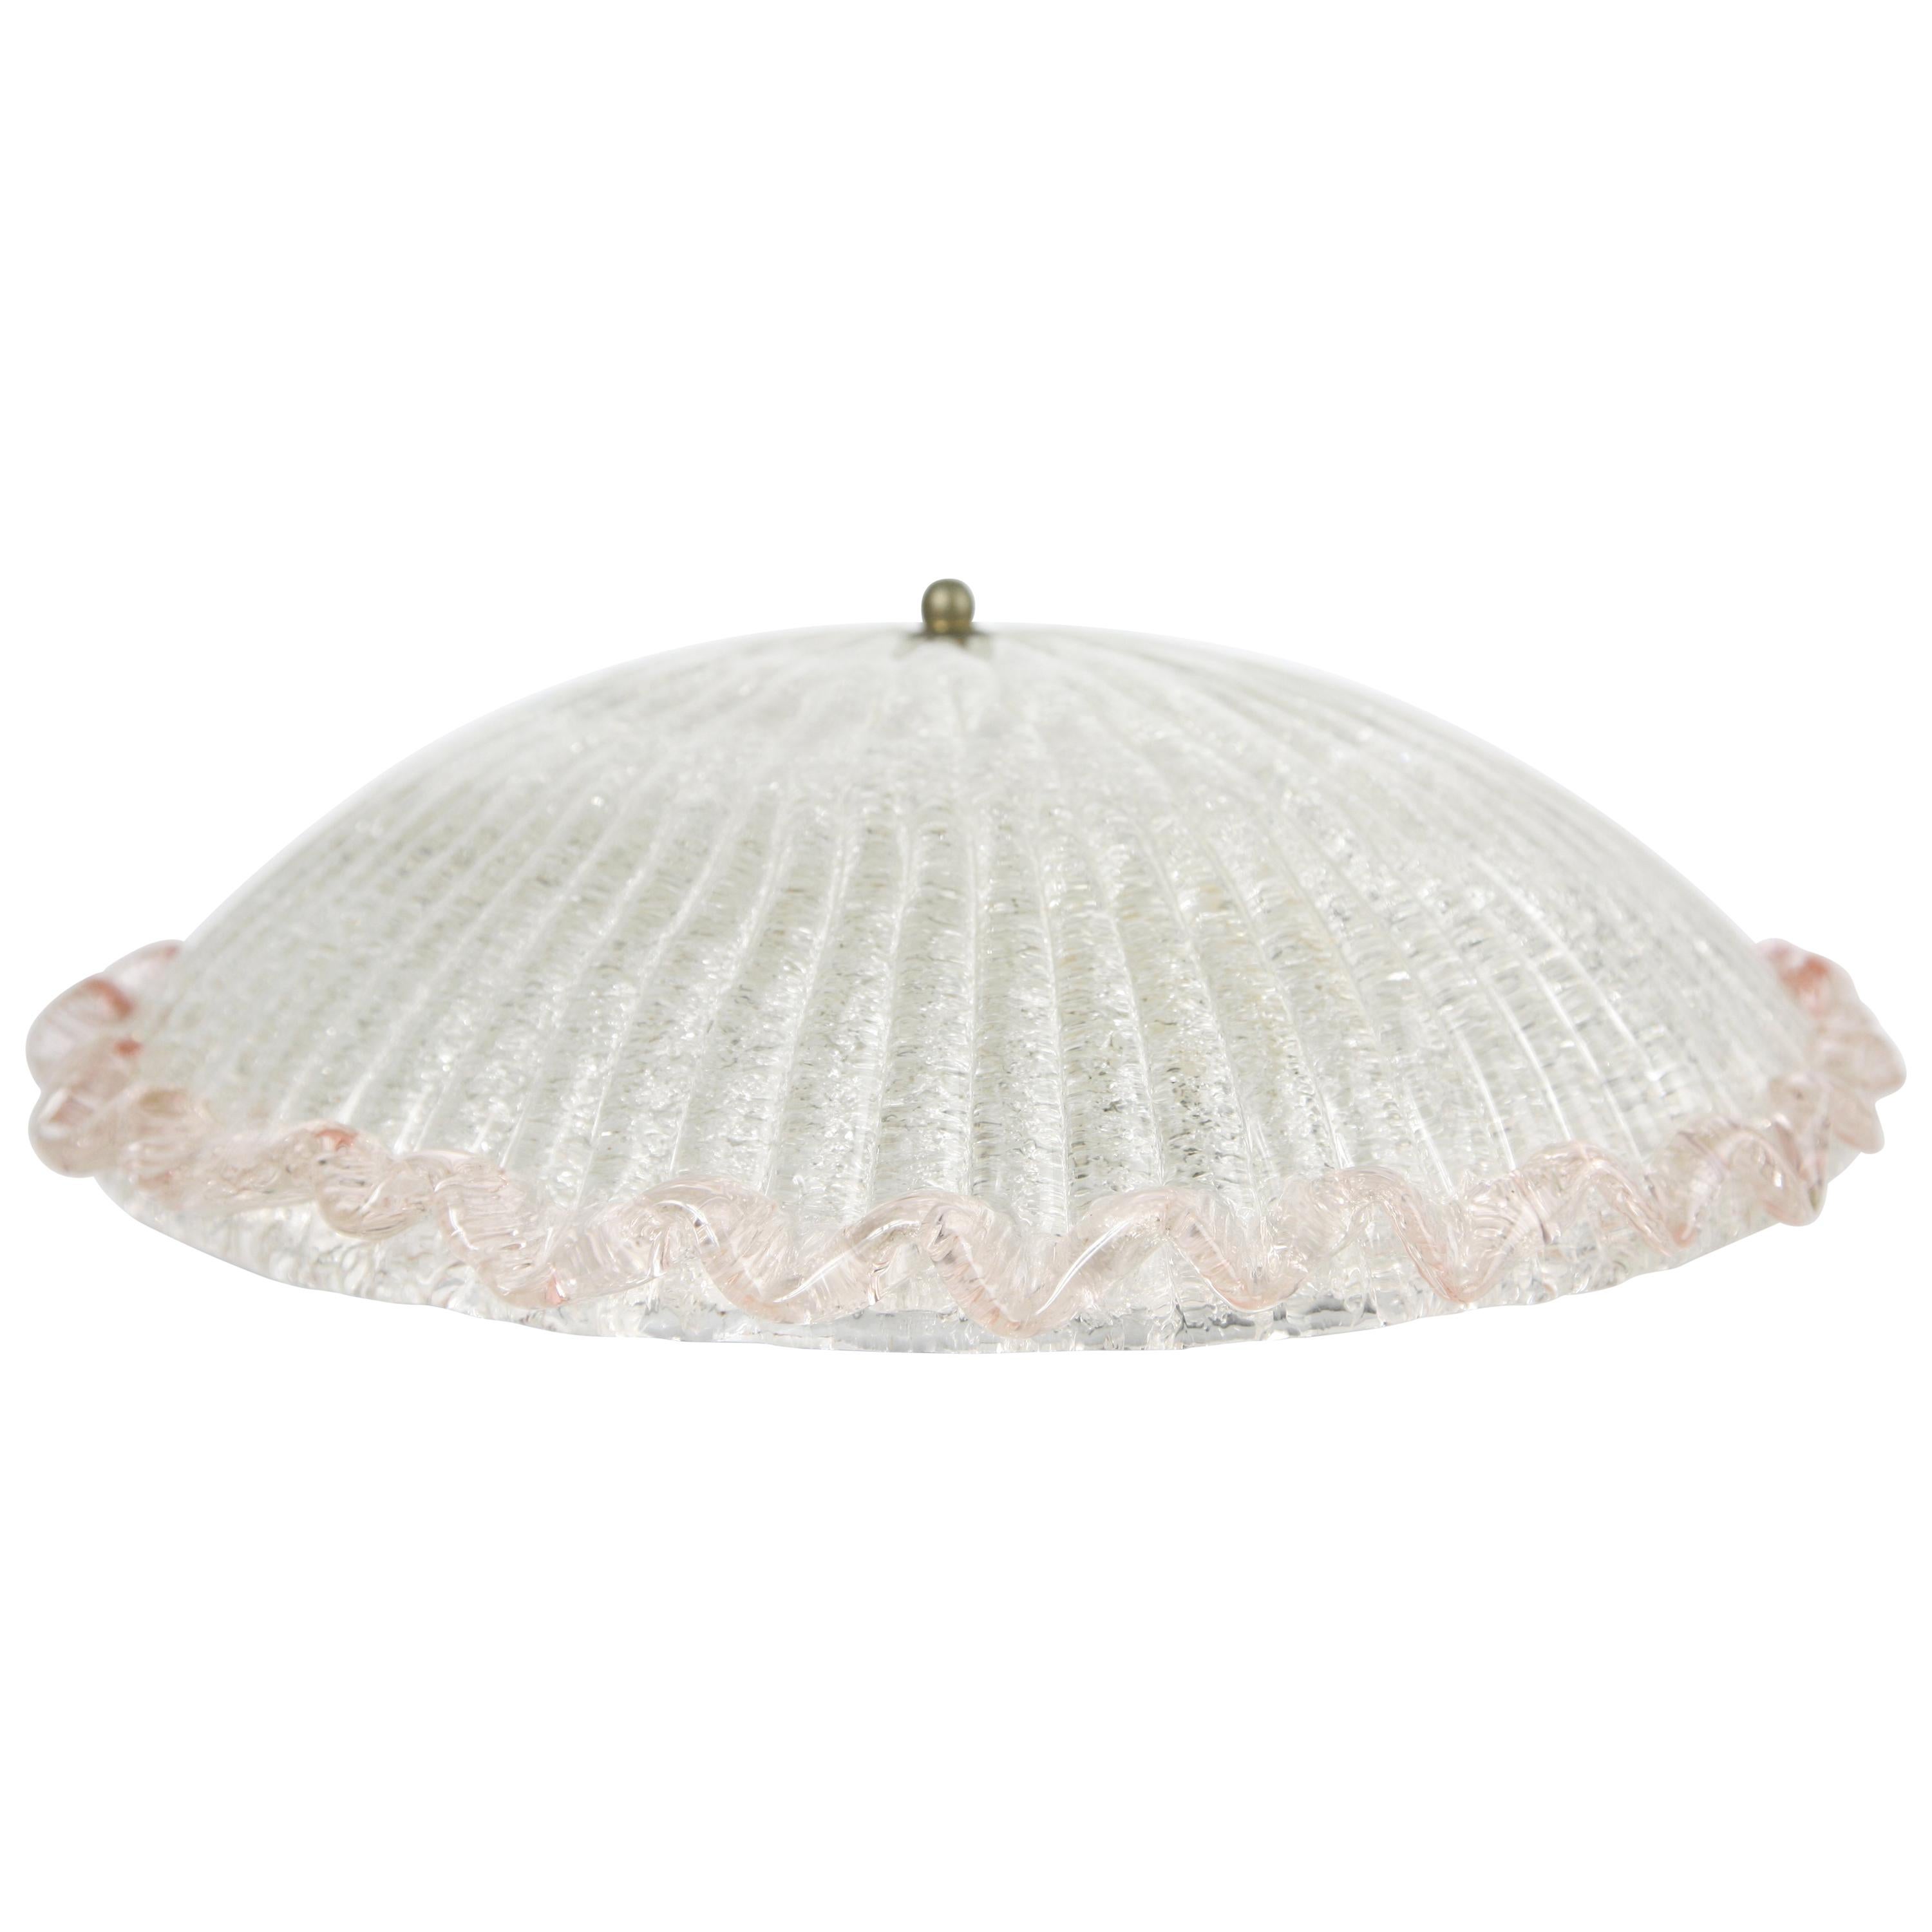 1950s Val Saint Lambert flush mount ceiling plate is white metal with 2 European sockets the shade is a dome shaped pressed glass that is clear with glass flakes on the inside of the dome which gives an effect in the glass the outer edge is pink